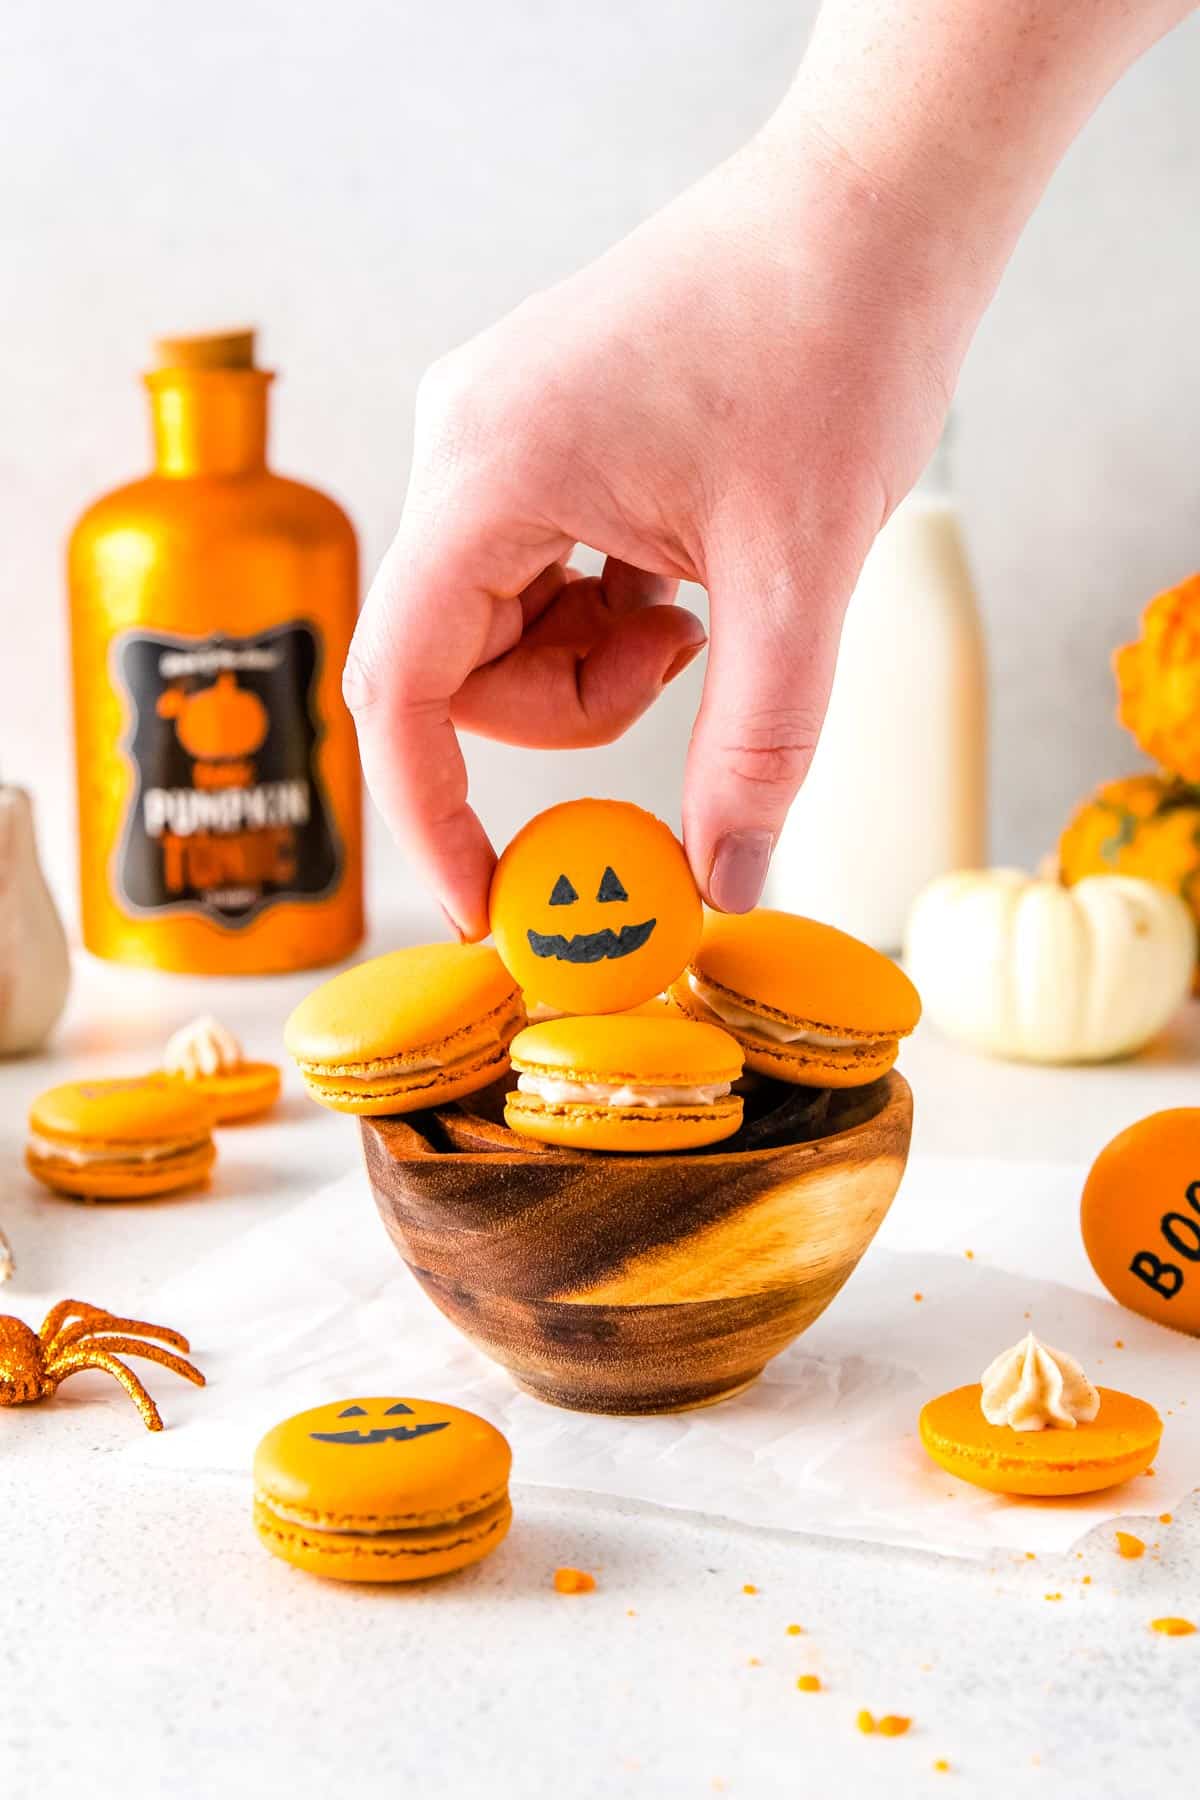 The Pumpkin Spice Macarons decorated with an edible black ink marker with a jar-o-lantern face for Halloween.